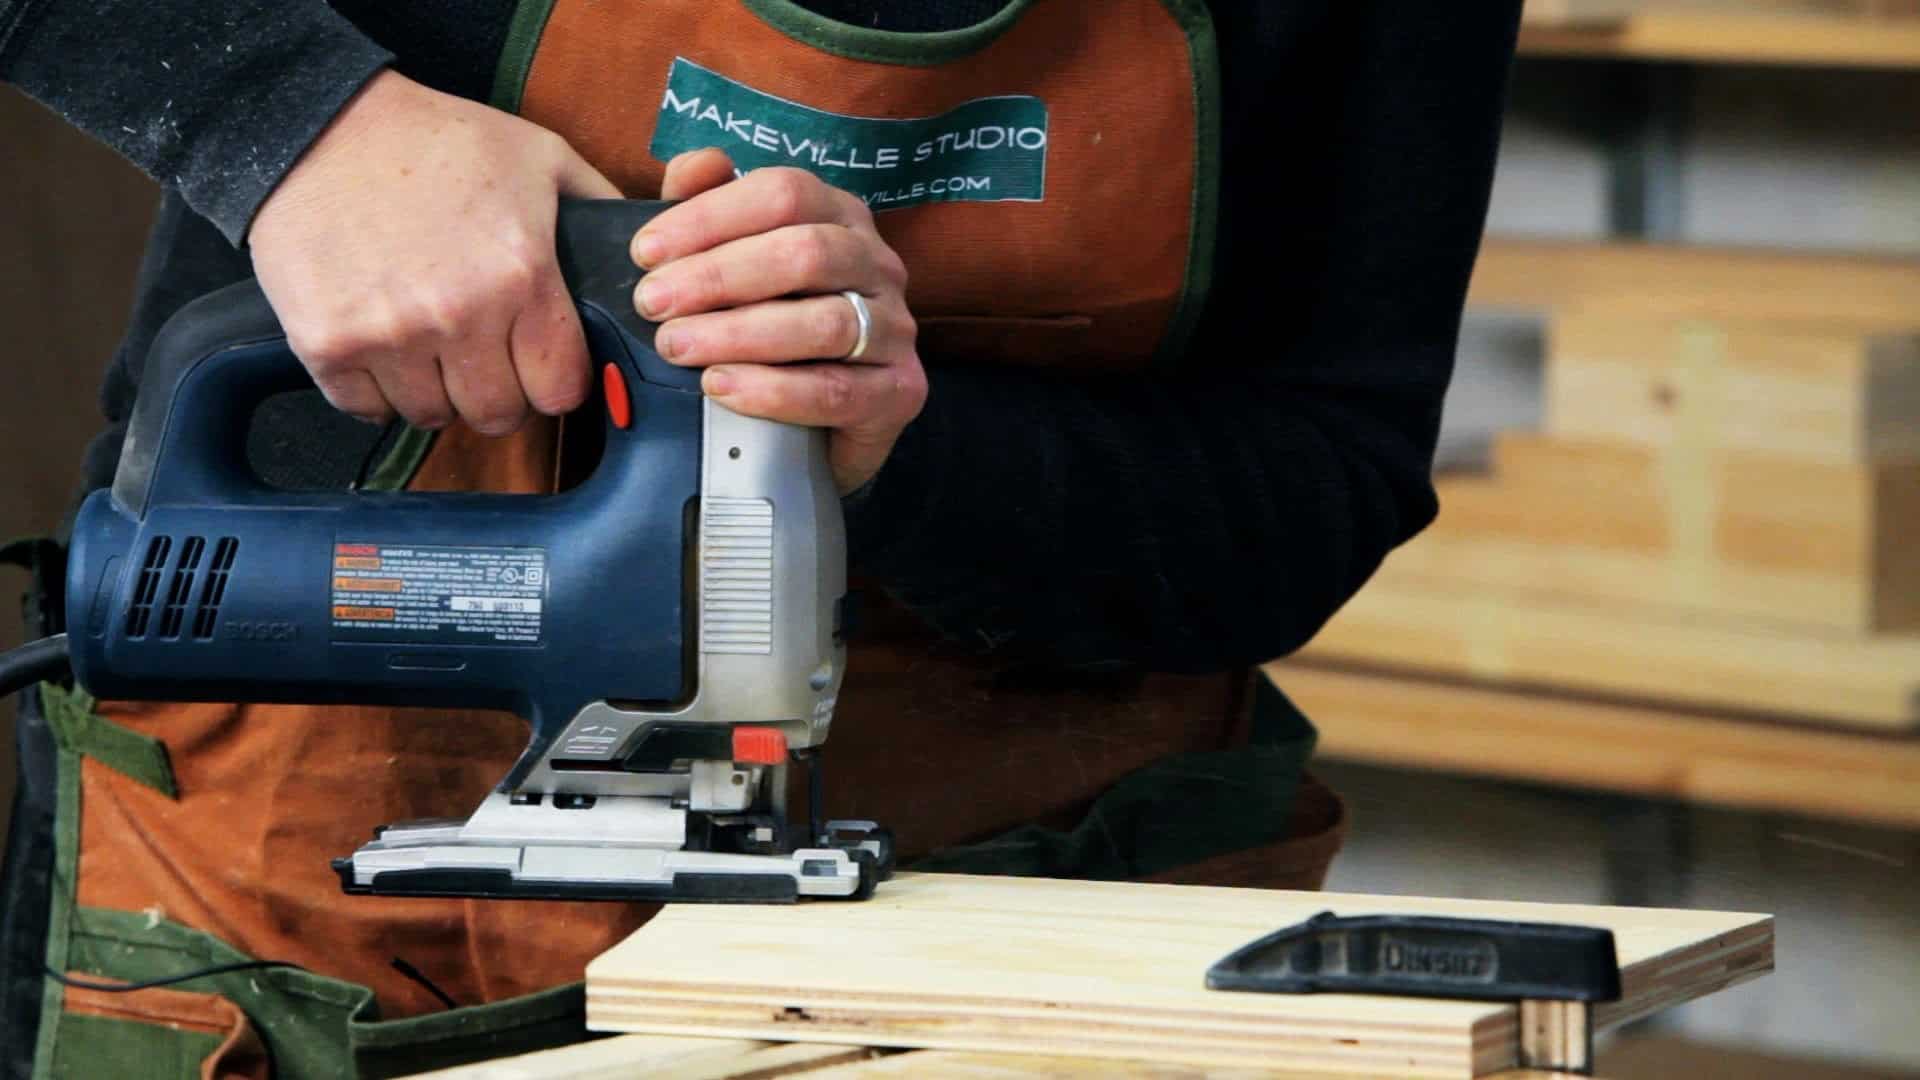 The Best Jigsaws for Woodworking - The Geek Pub